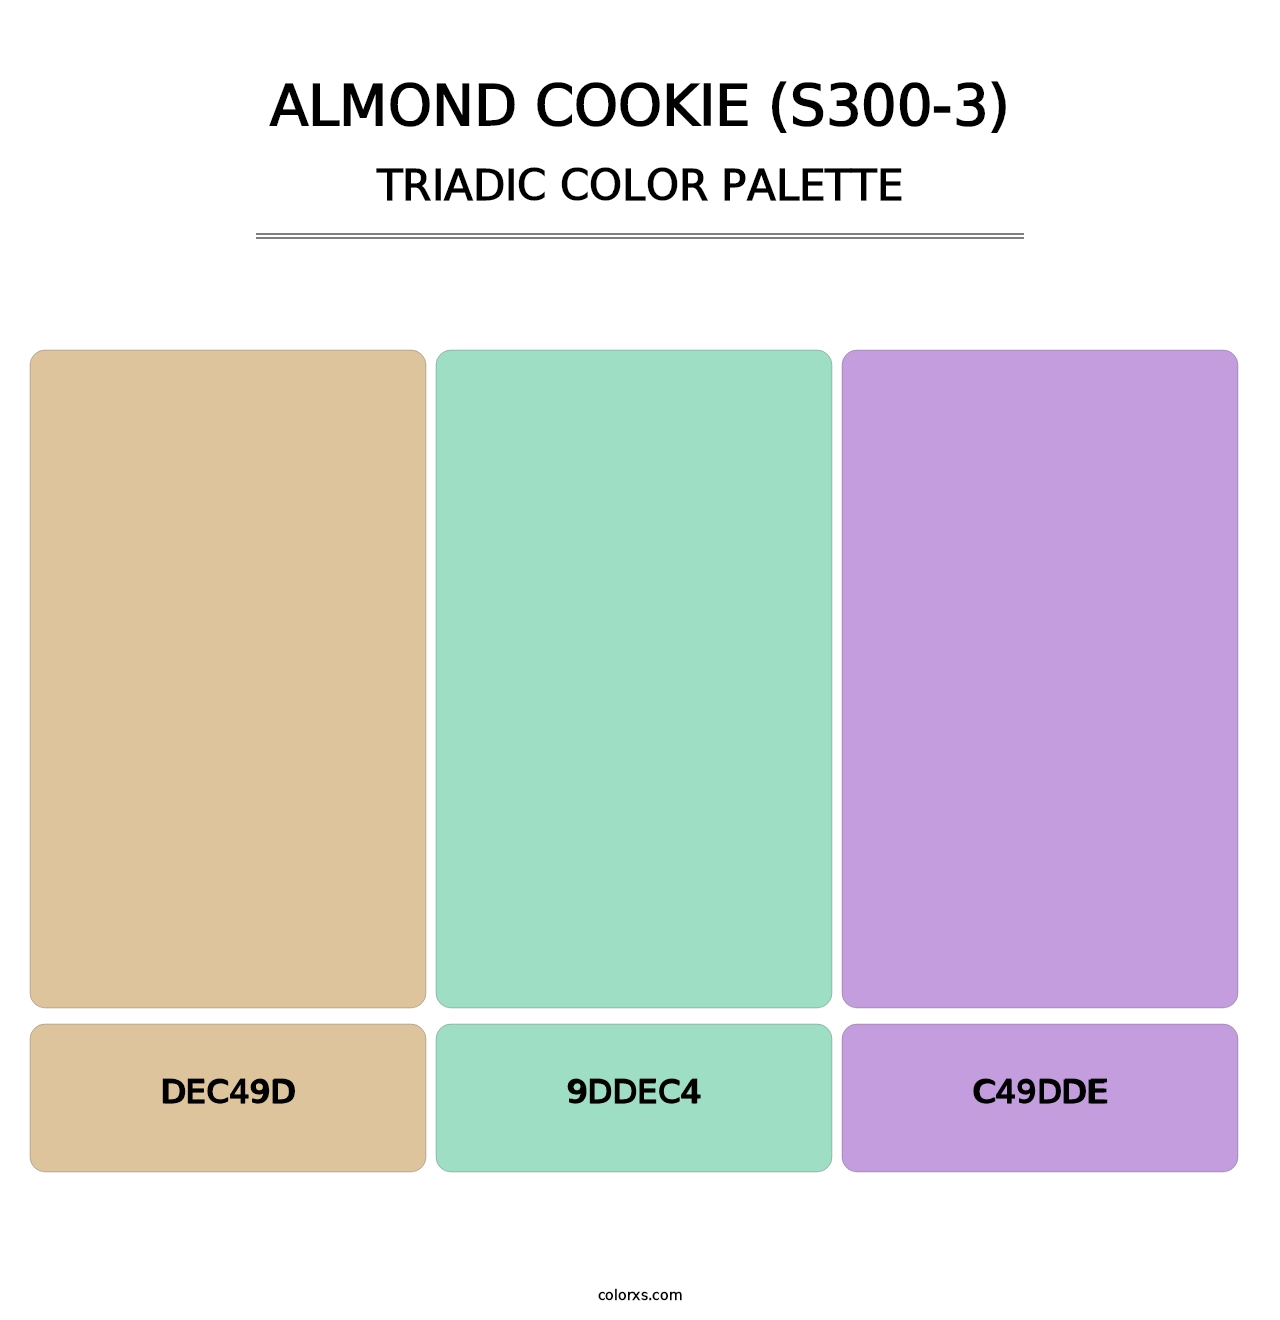 Almond Cookie (S300-3) - Triadic Color Palette